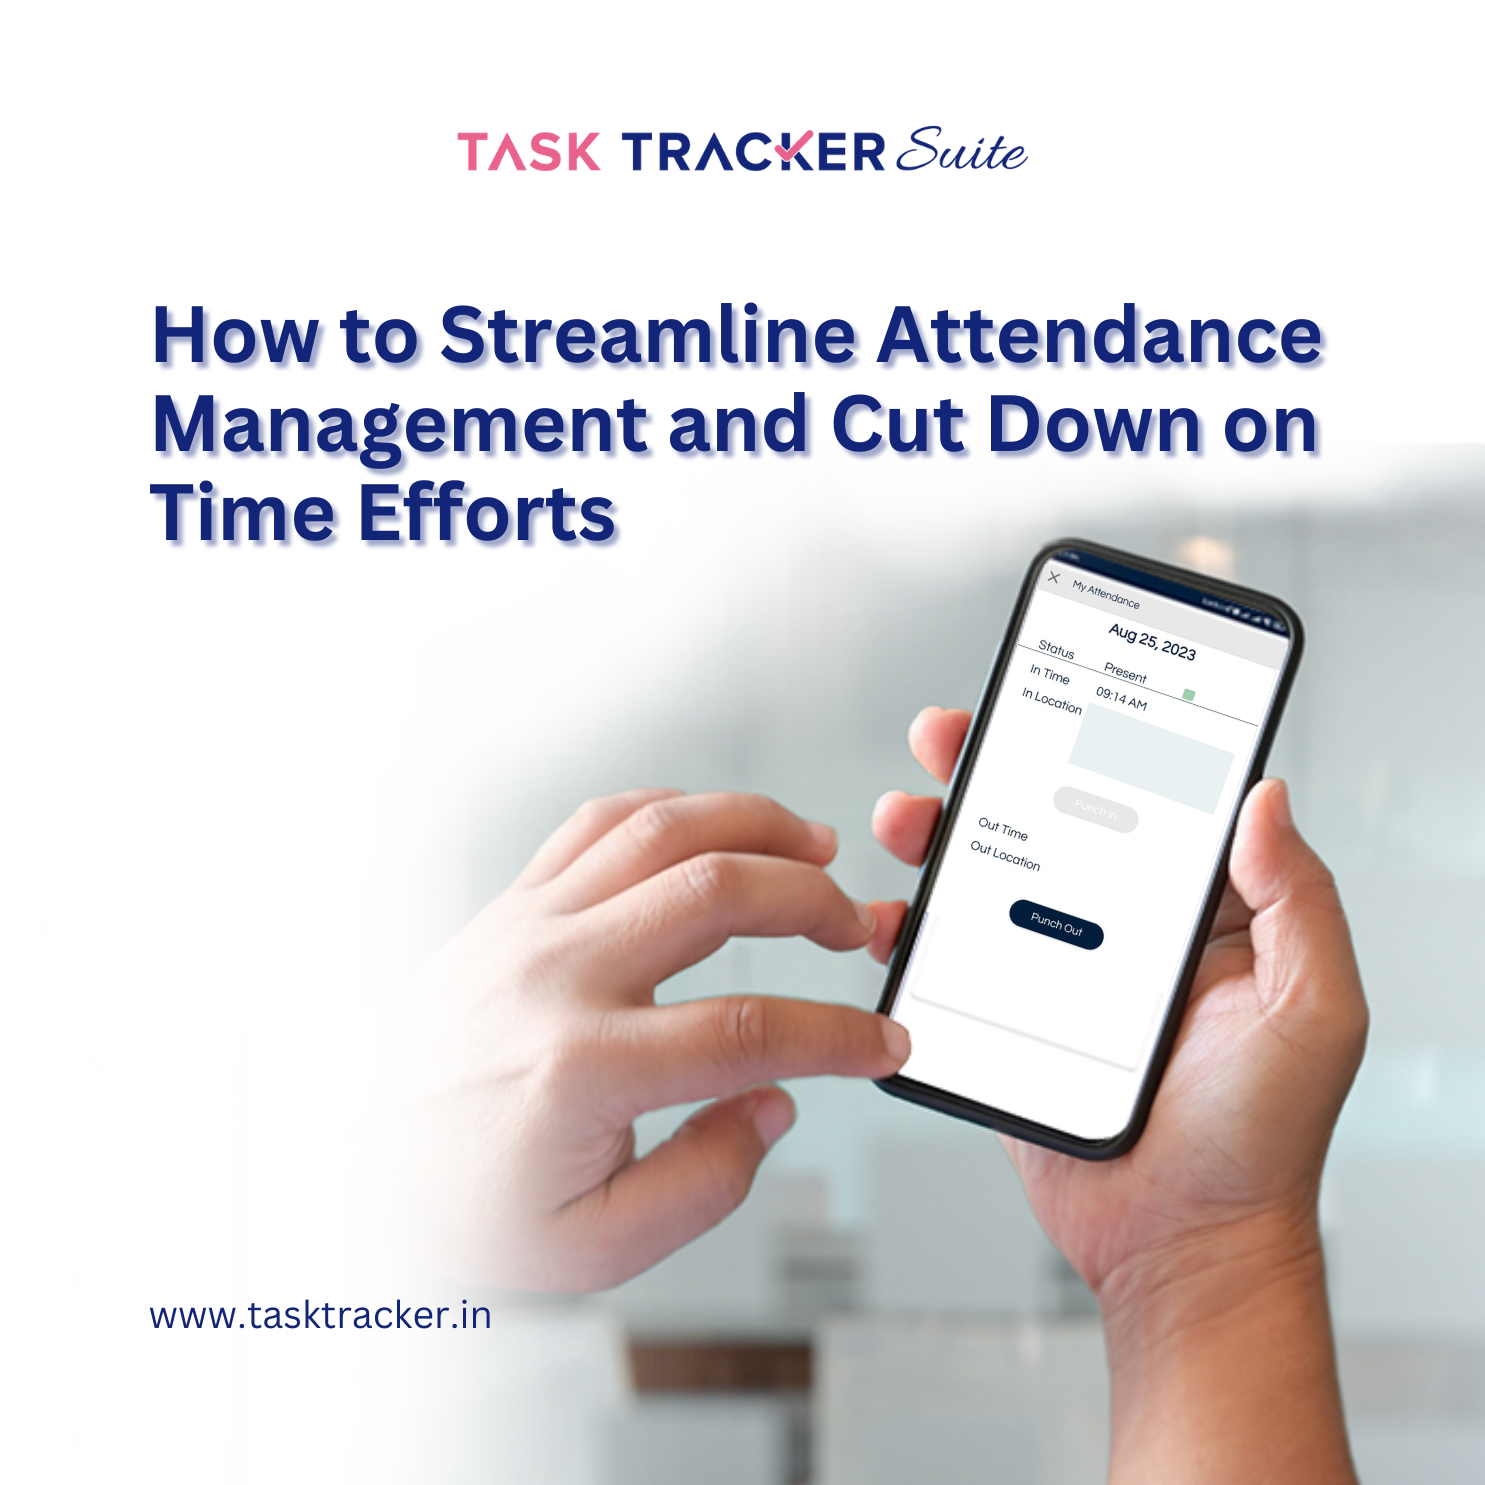 How to Streamline Attendance Management and Cut Down on Time Efforts